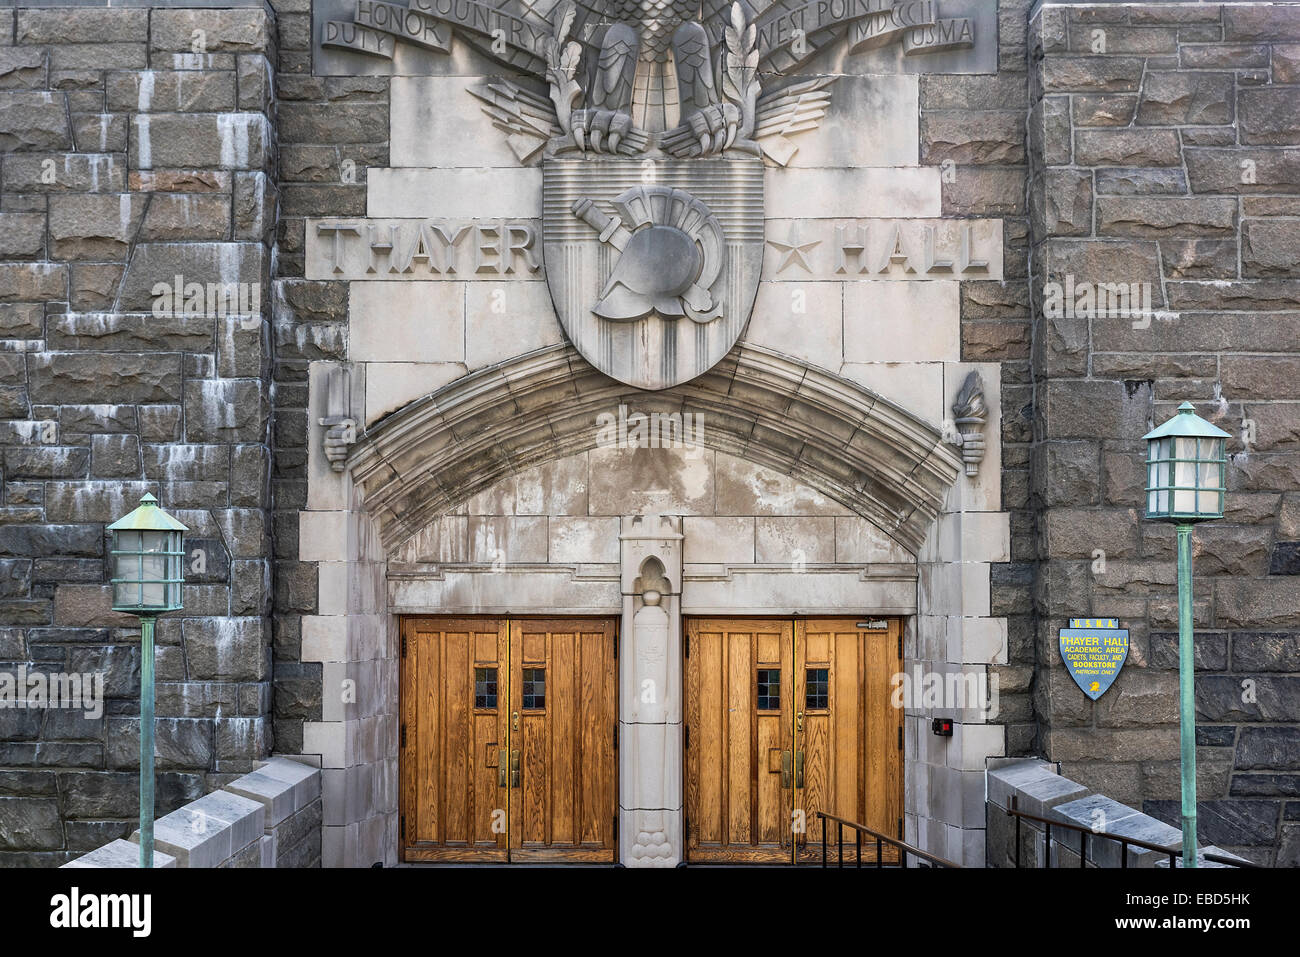 Thayer Hall, West Point Military Academy campus, New York, USA Stock Photo